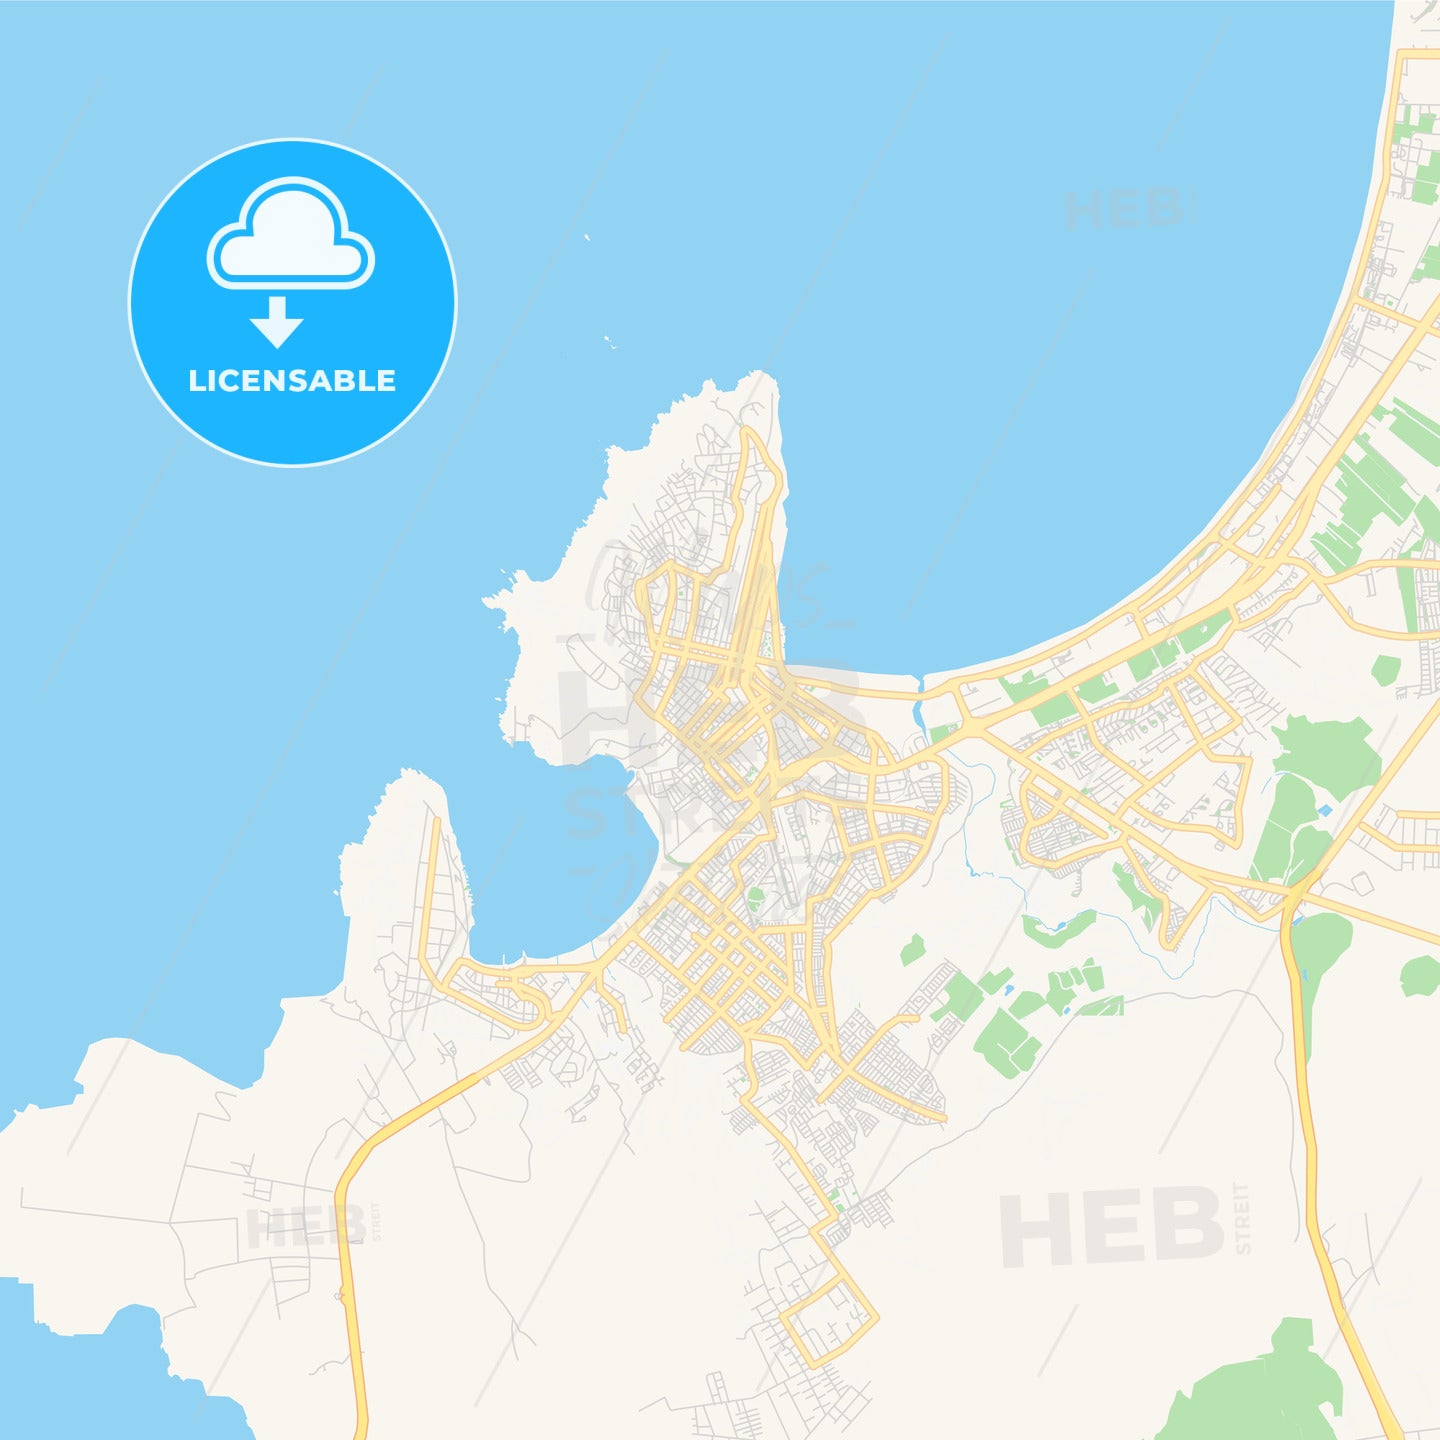 Printable street map of Coquimbo, Chile